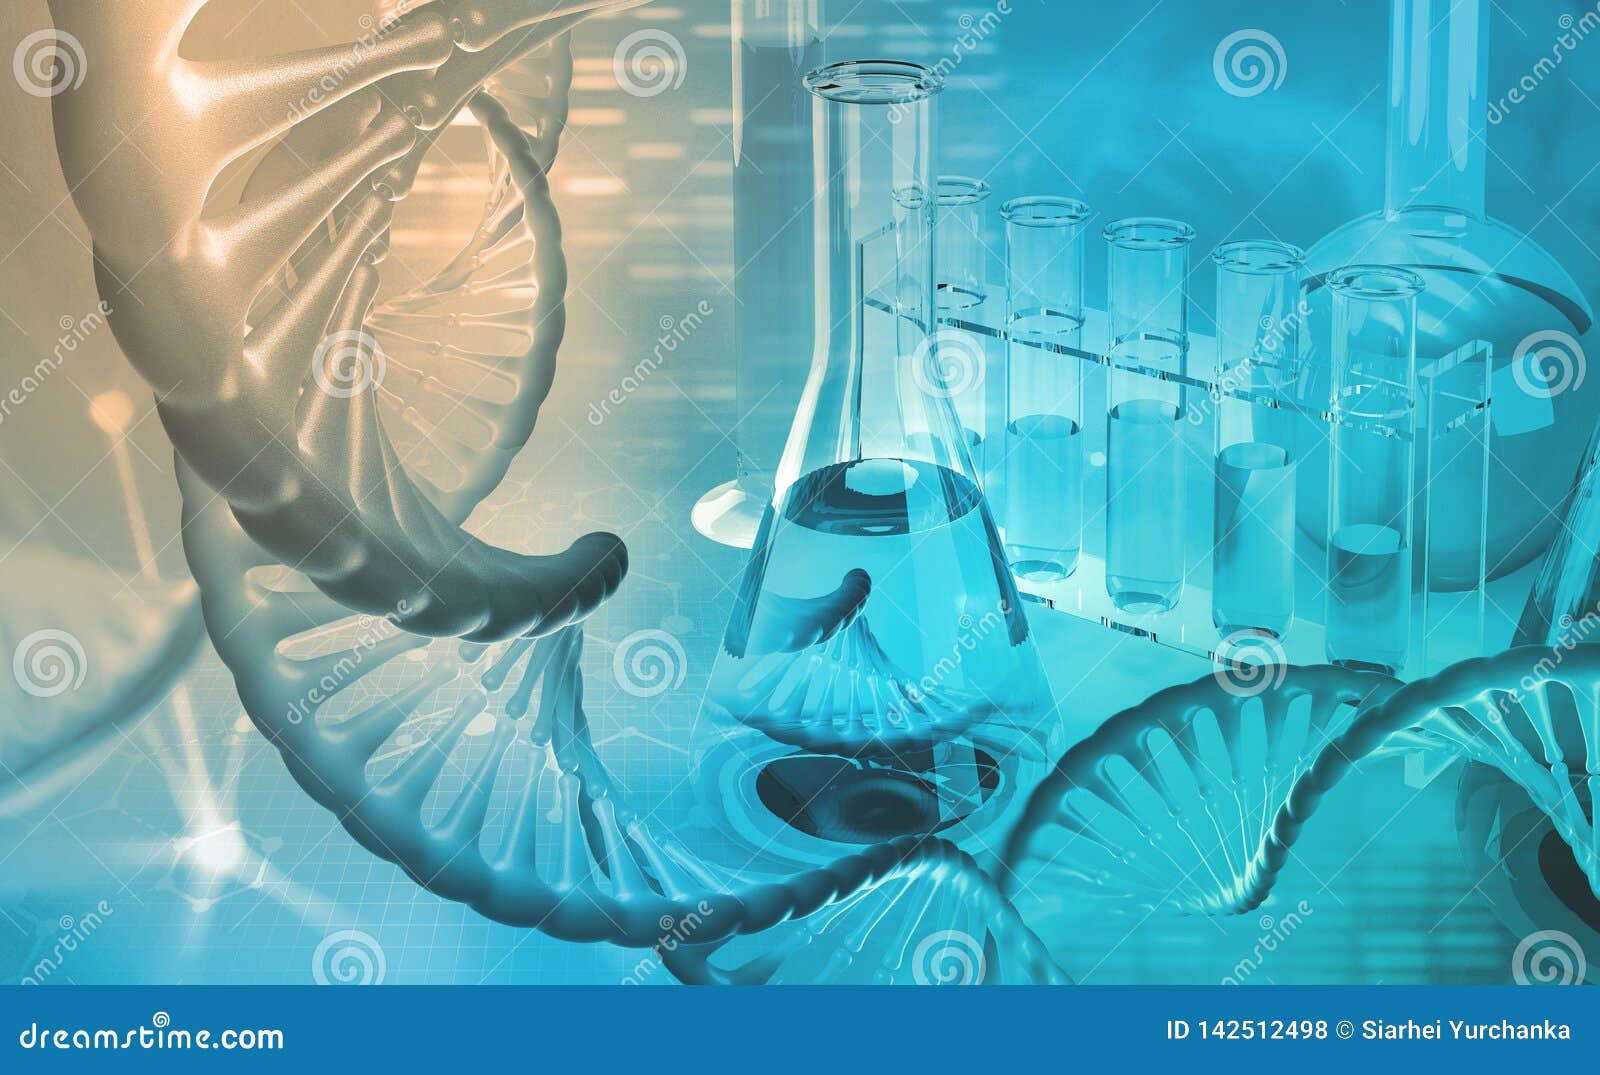 dna. microbiology. scientific laboratory. studies of the human genome